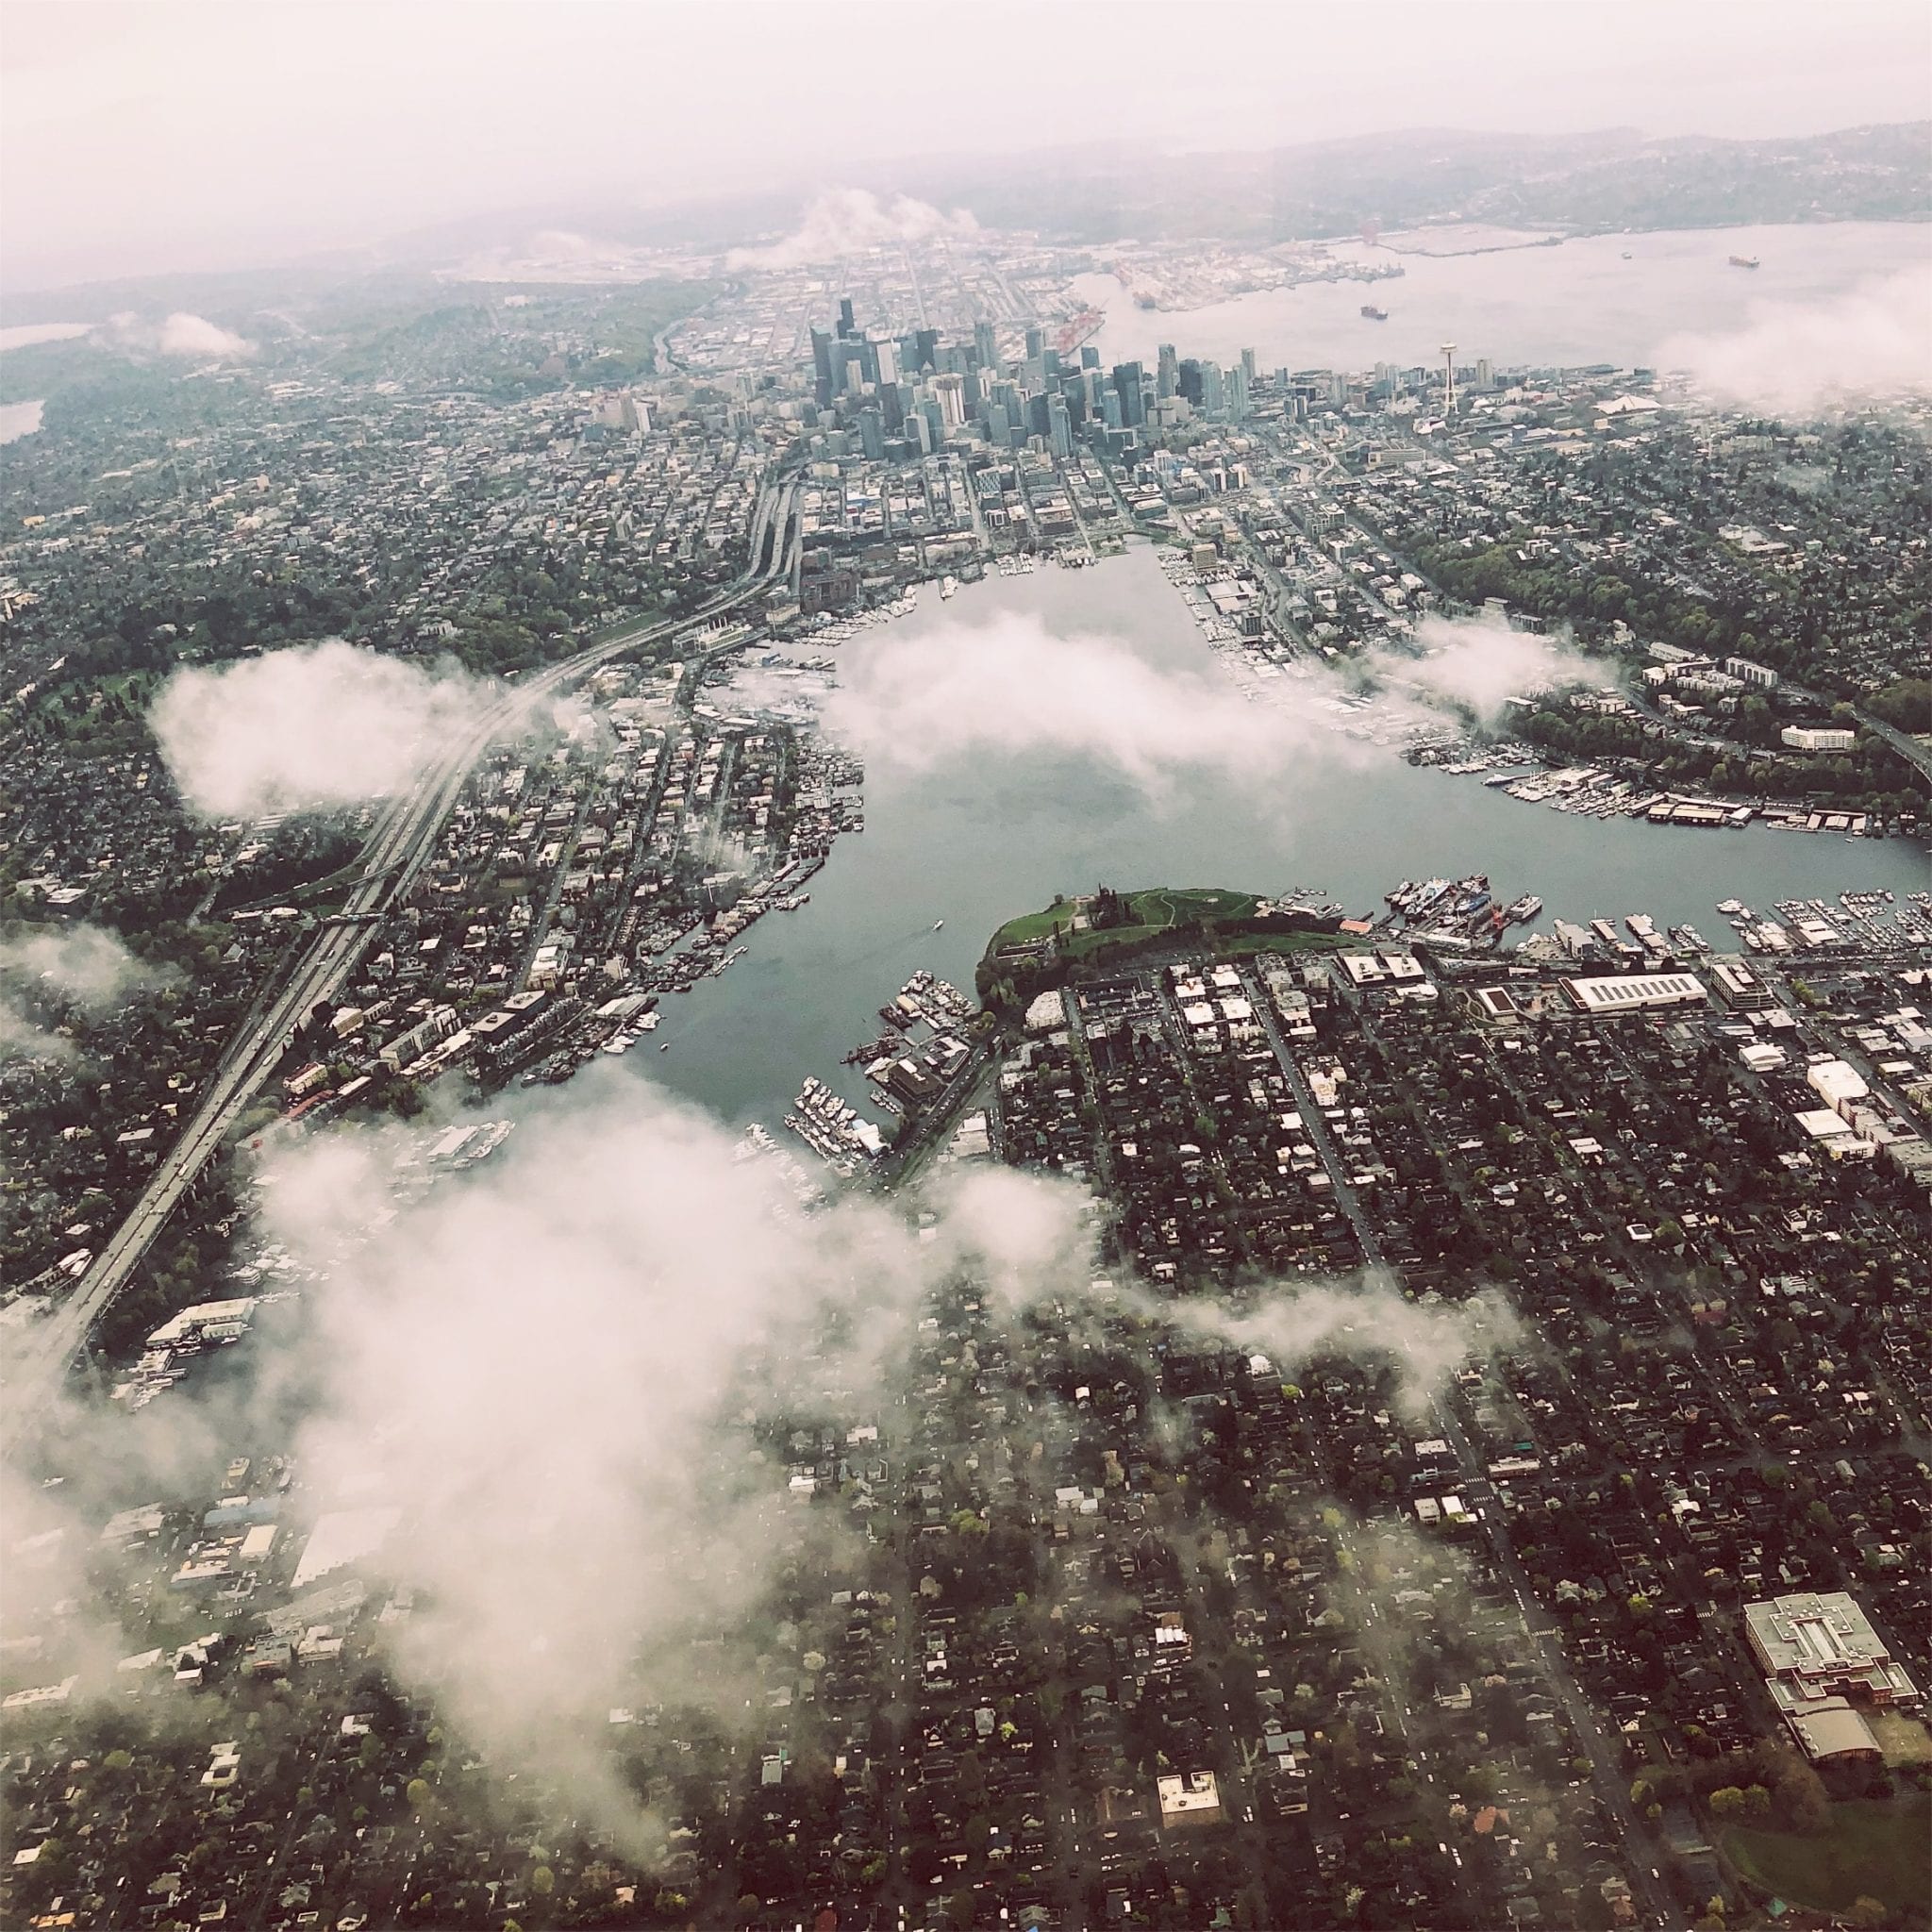 Seattle viewed from above. Phoacto by Ryan Wilson on Unsplash